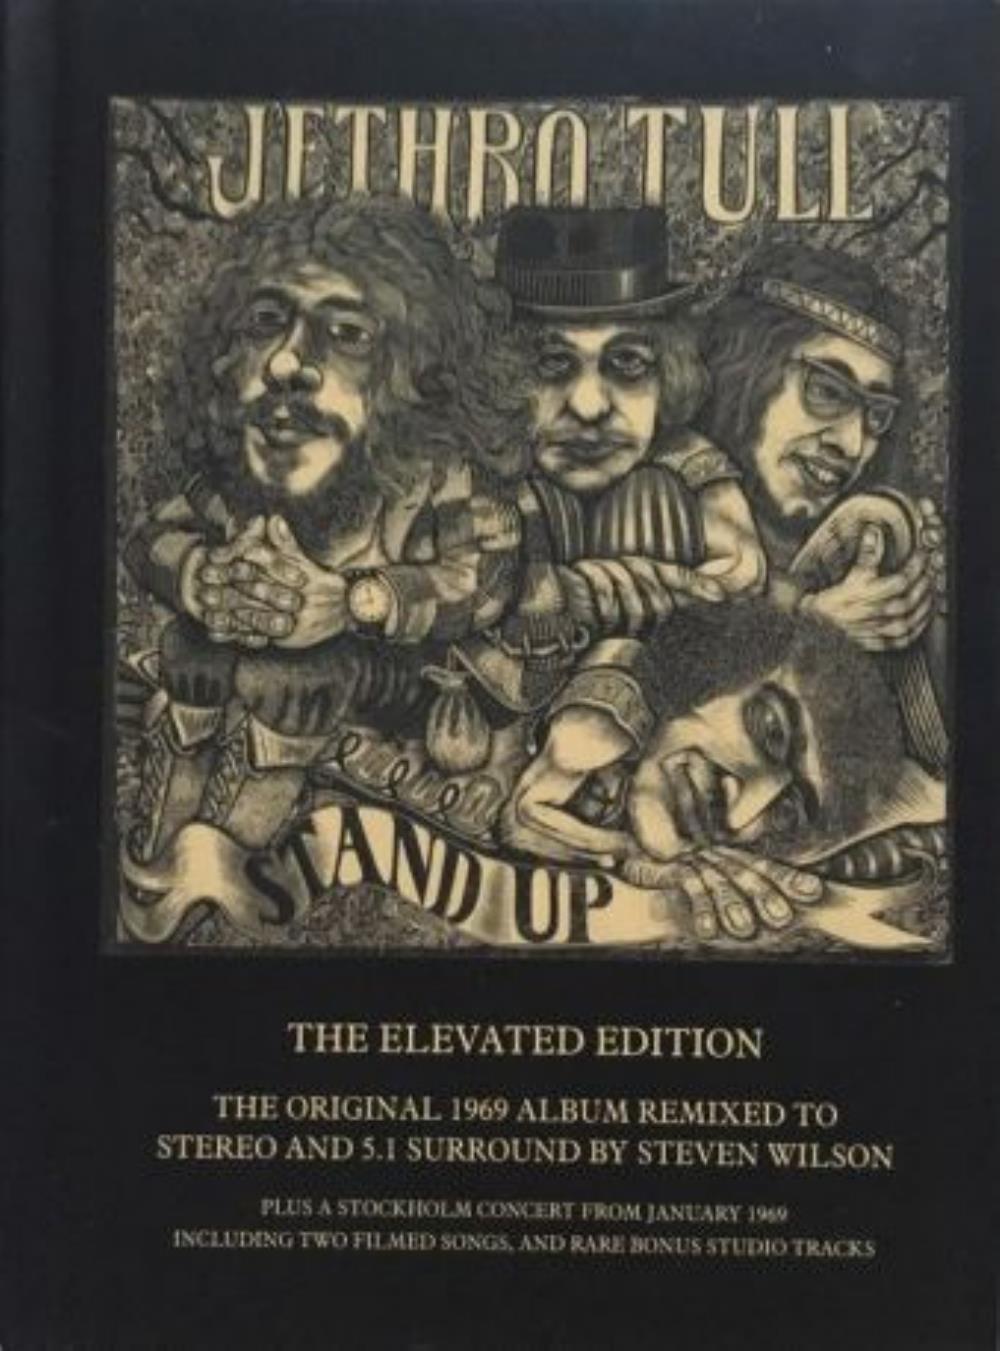 Jethro Tull - Stand Up - The Elevated Edition CD (album) cover